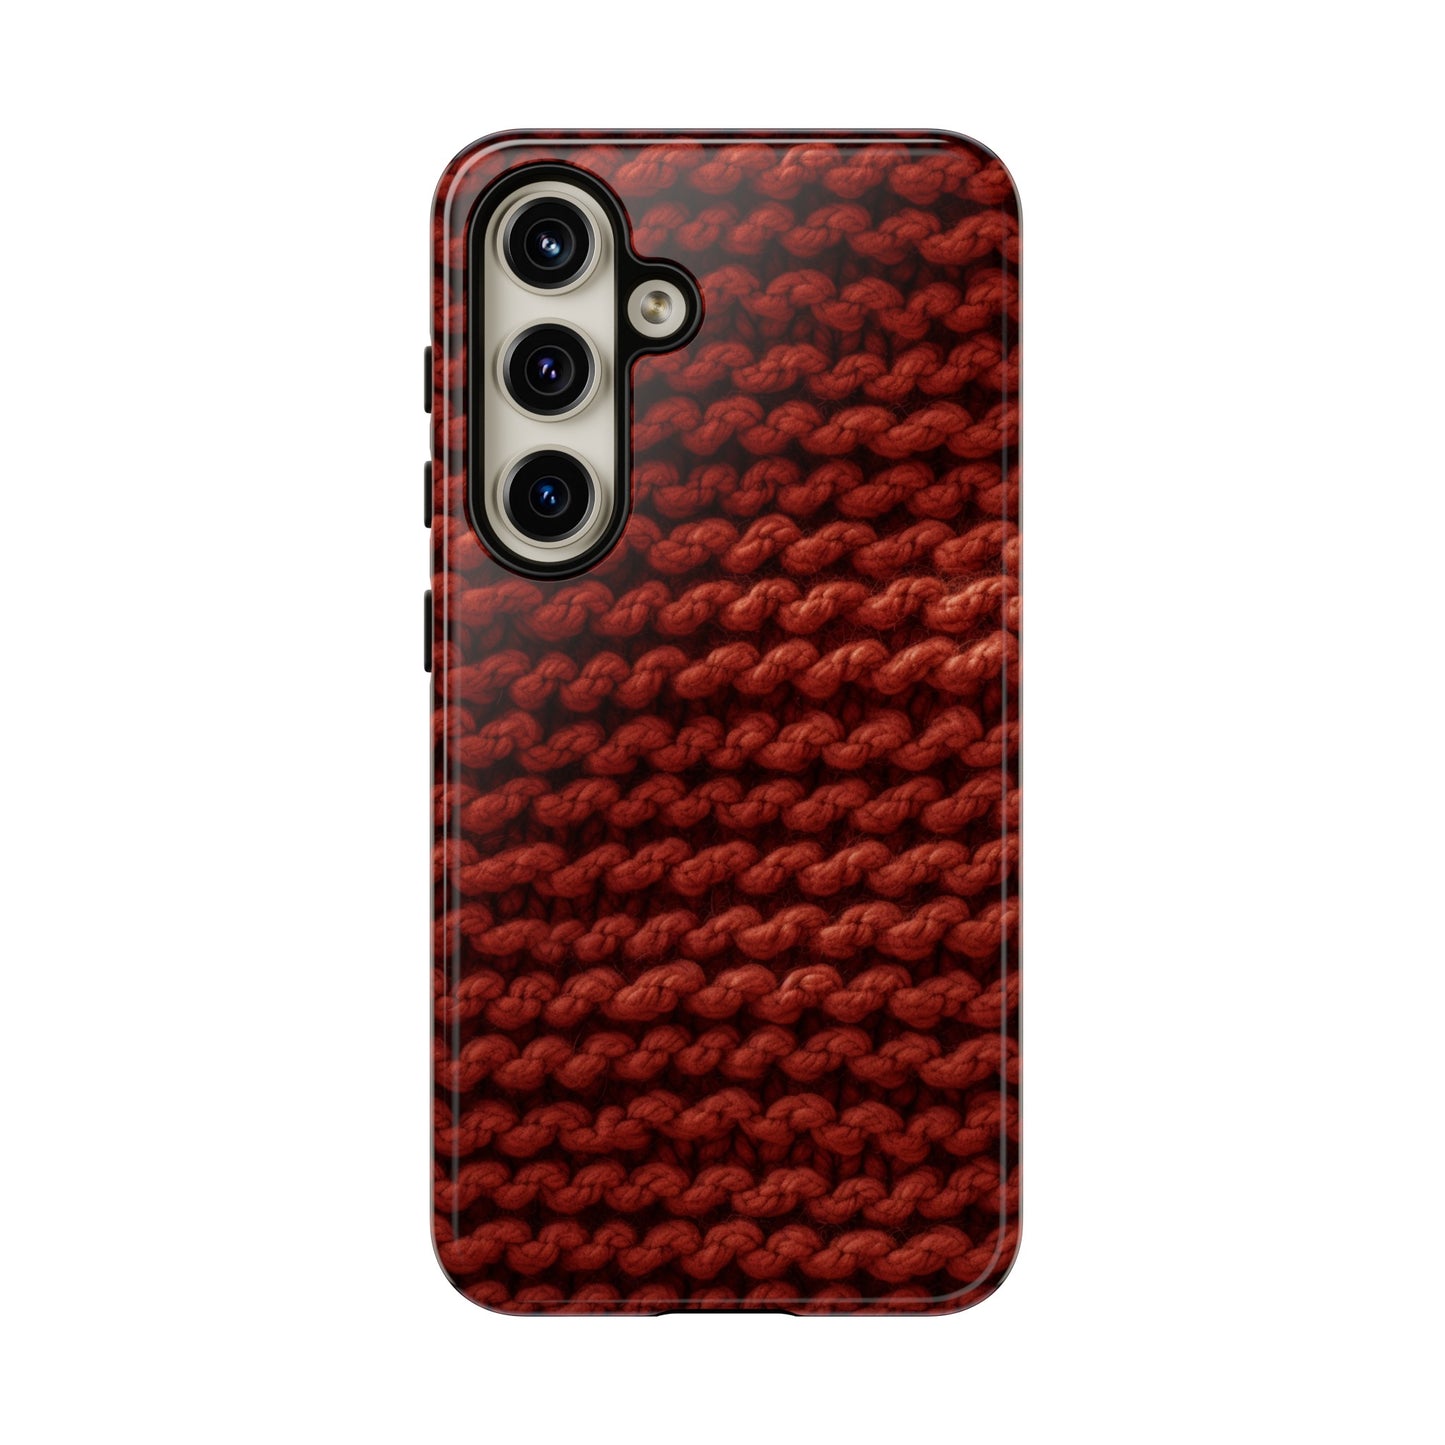 Autumn Yarn Chronicles - Warmth and Tradition in a Tough Phone Case